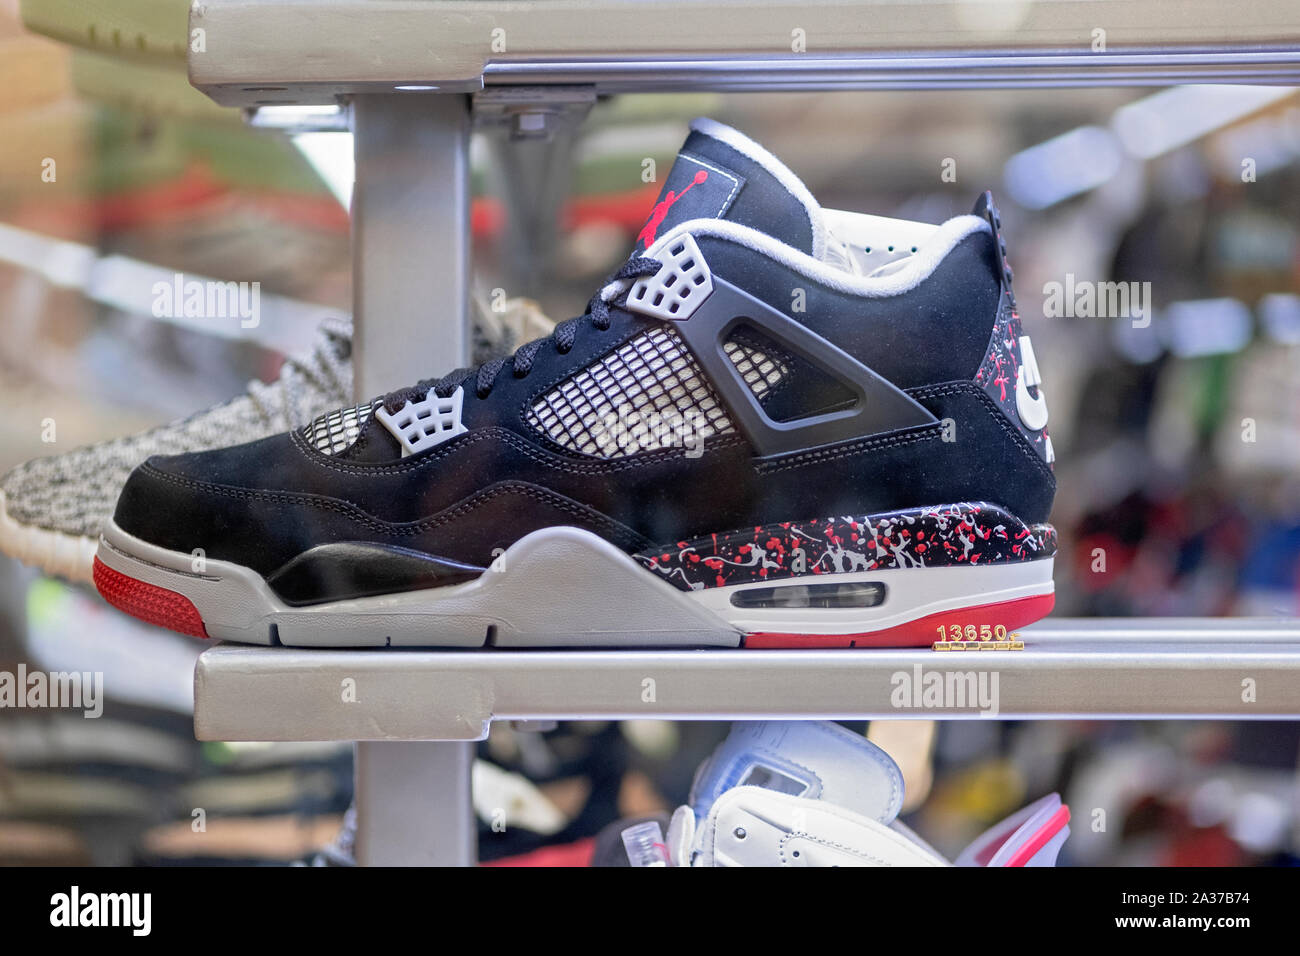 A rare expensive AIR JORDAN 4 shoe which debuted in 1989, for sale for  $13,850 at Flight Club on Broadway in Greenwich Village Stock Photo - Alamy